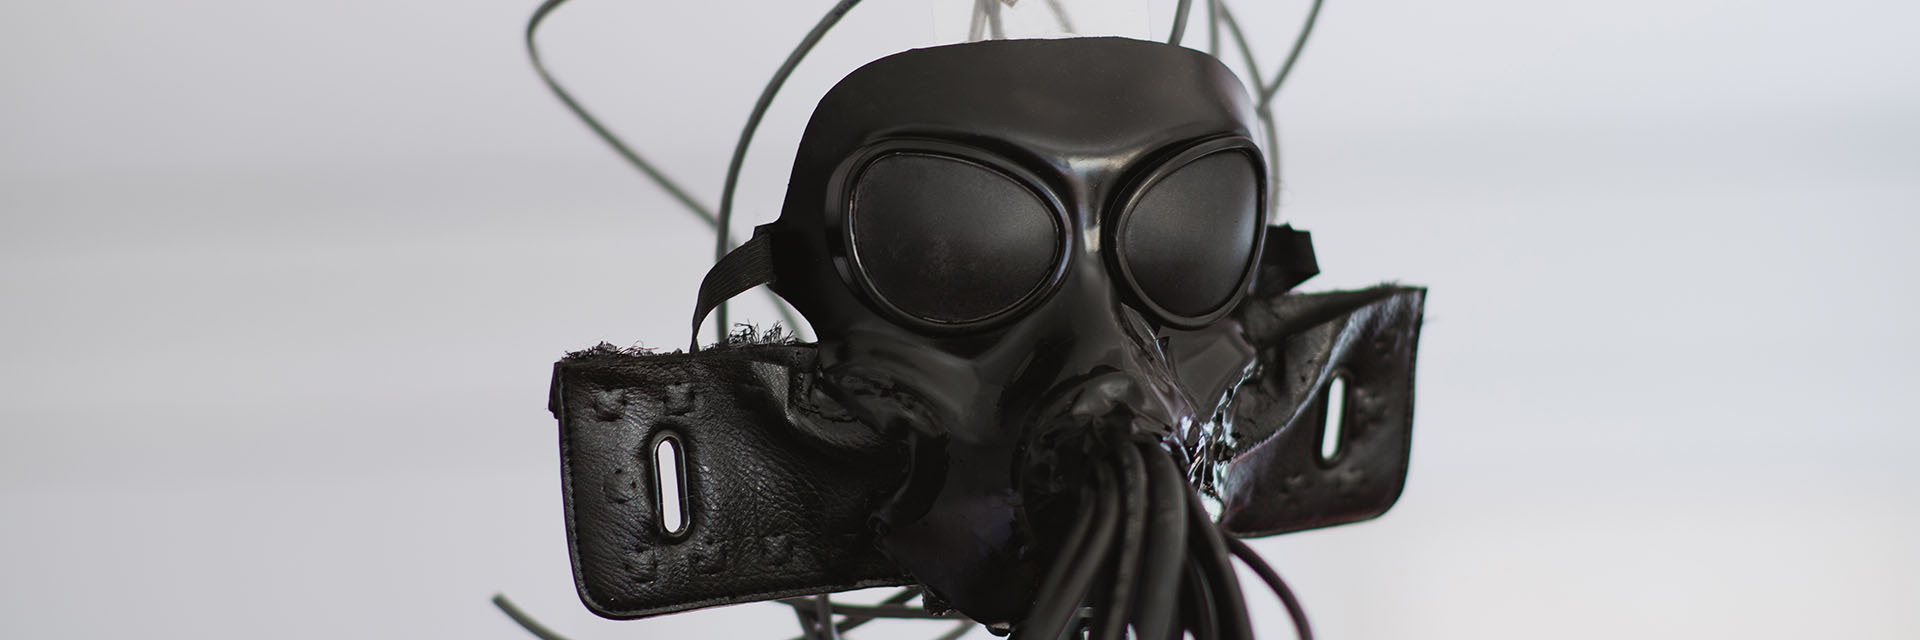 face mask that looks like a gas mask but with many wires coming out of it. 